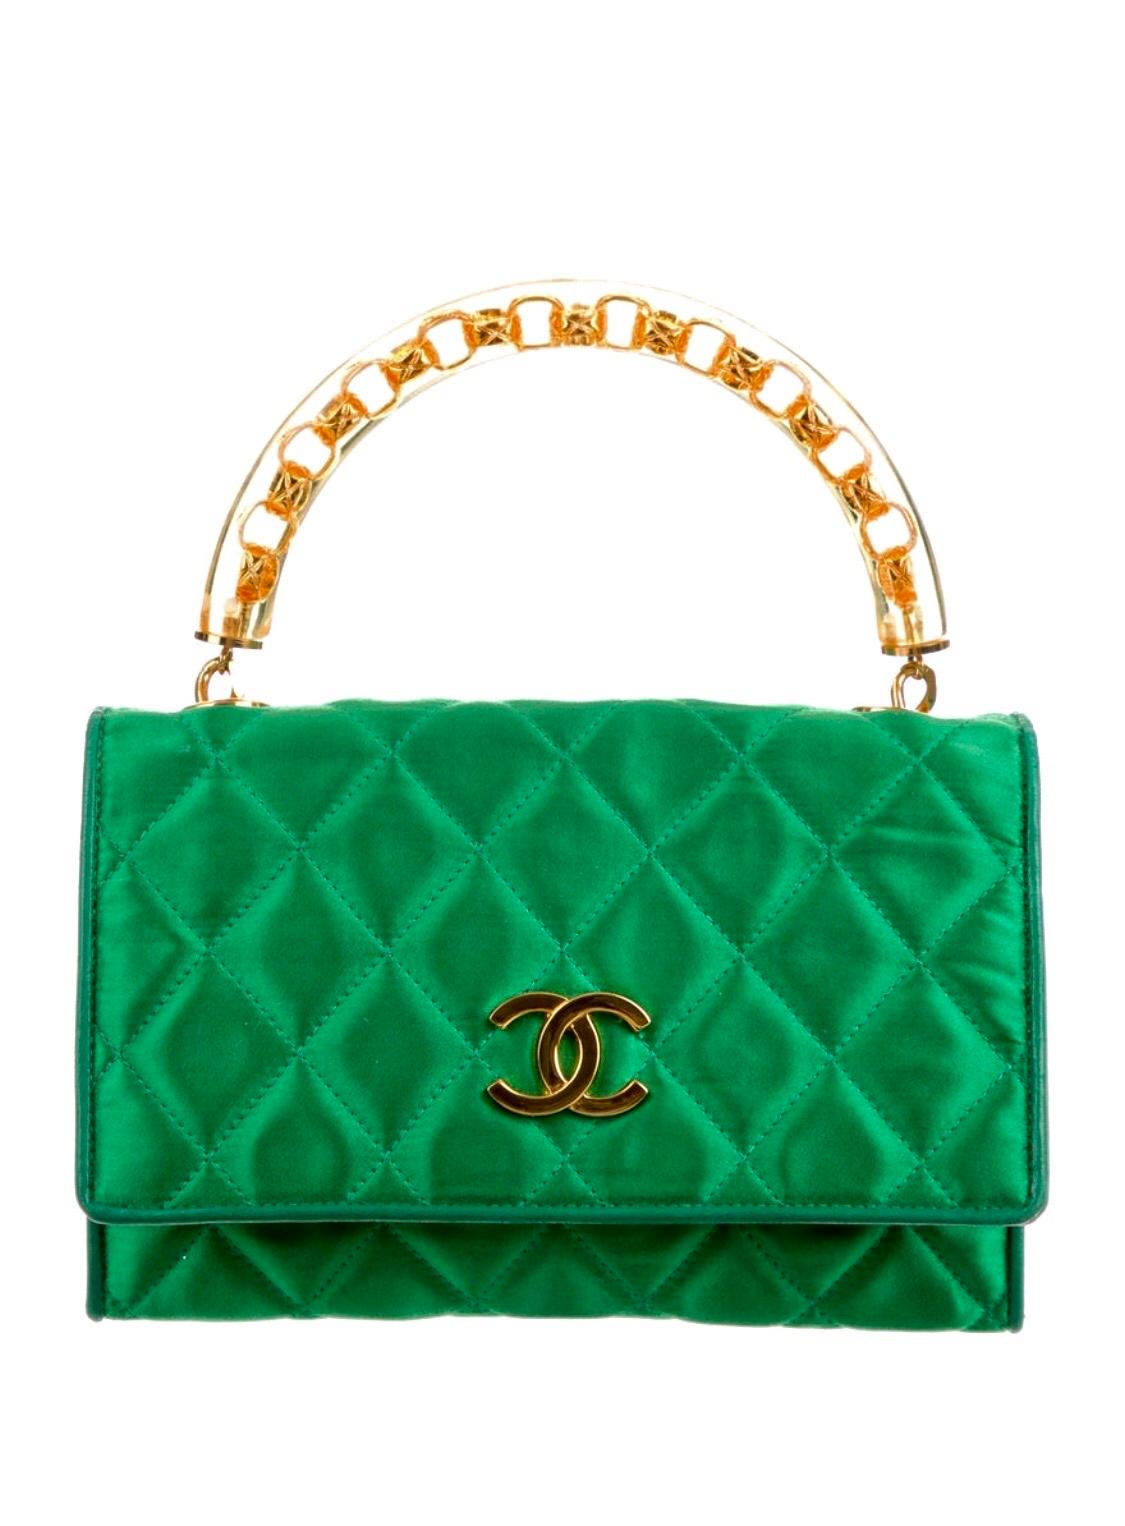 Chanel Rare Vintage Green Satin Lucite Gold Chain Top Handle Bag at 1stDibs